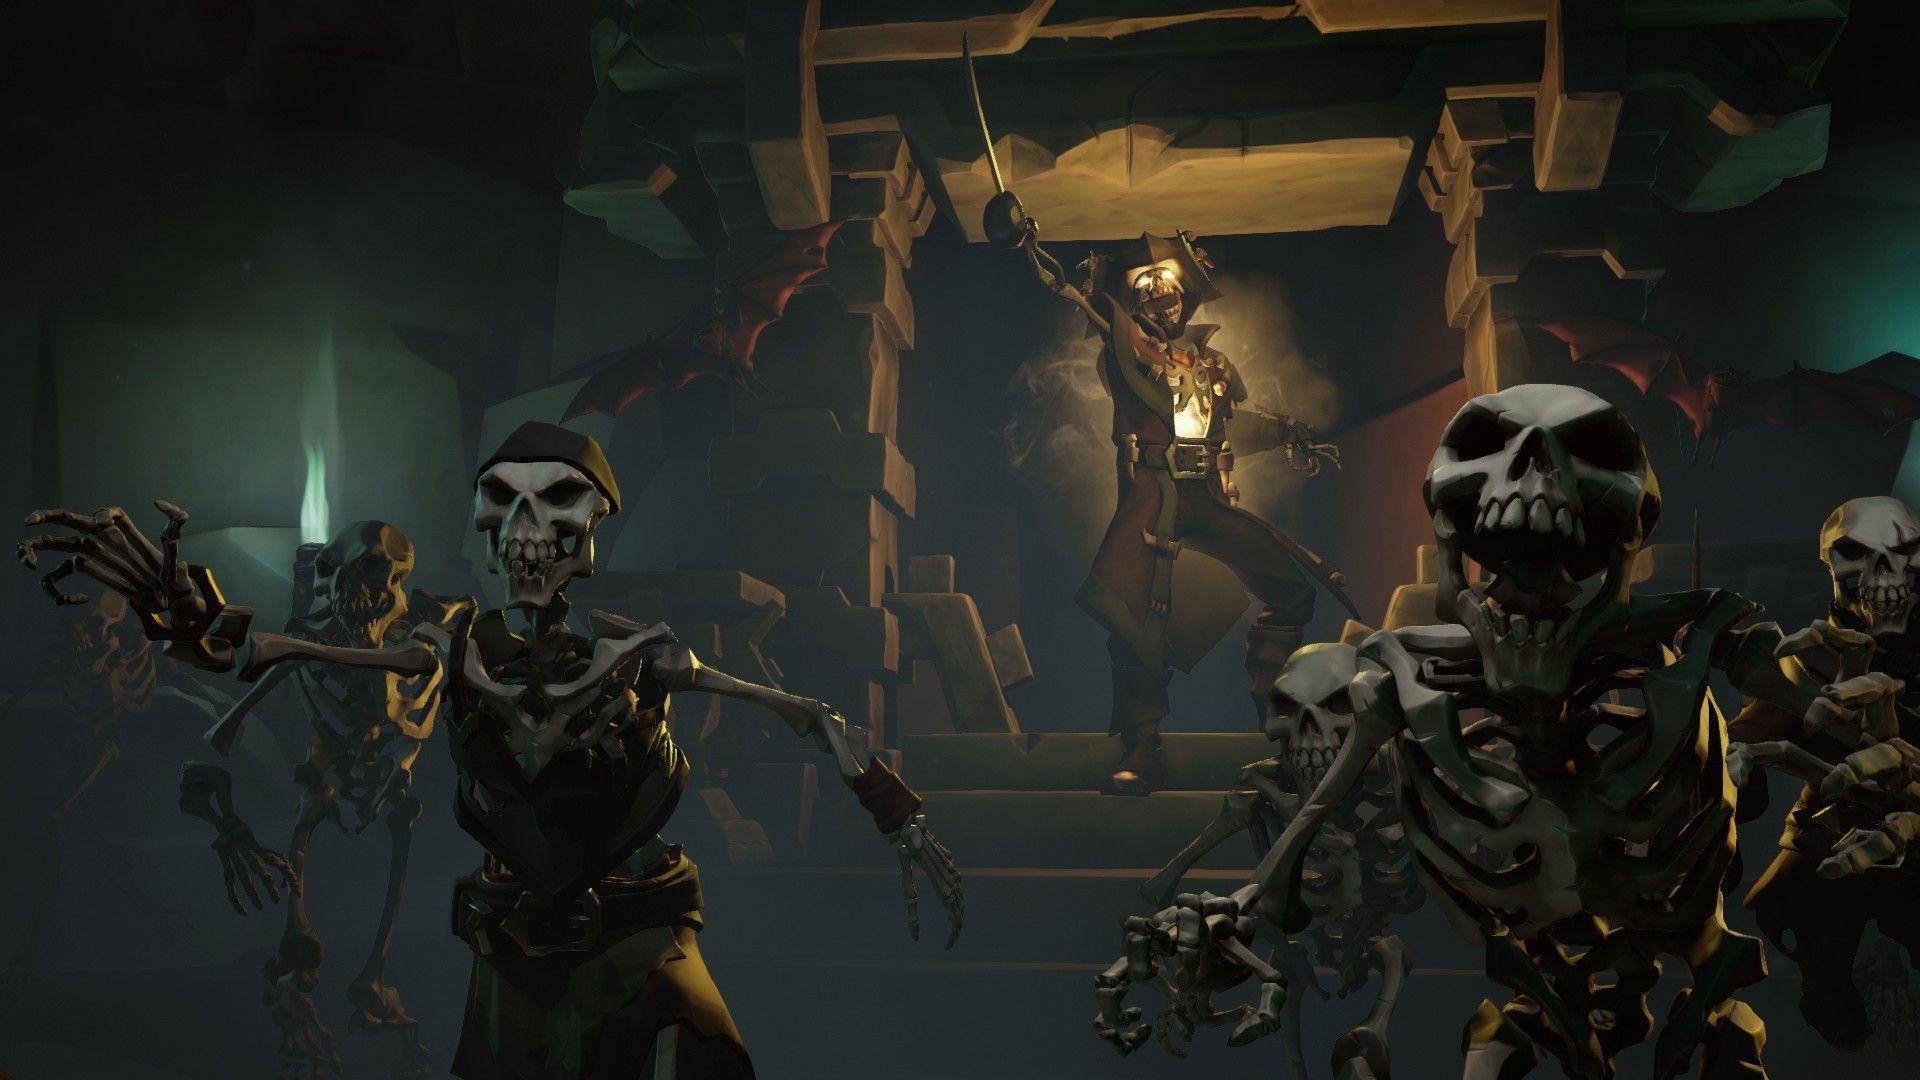 Rare's Sea of Thieves Gets Tons of Screenshots and Art: Ships